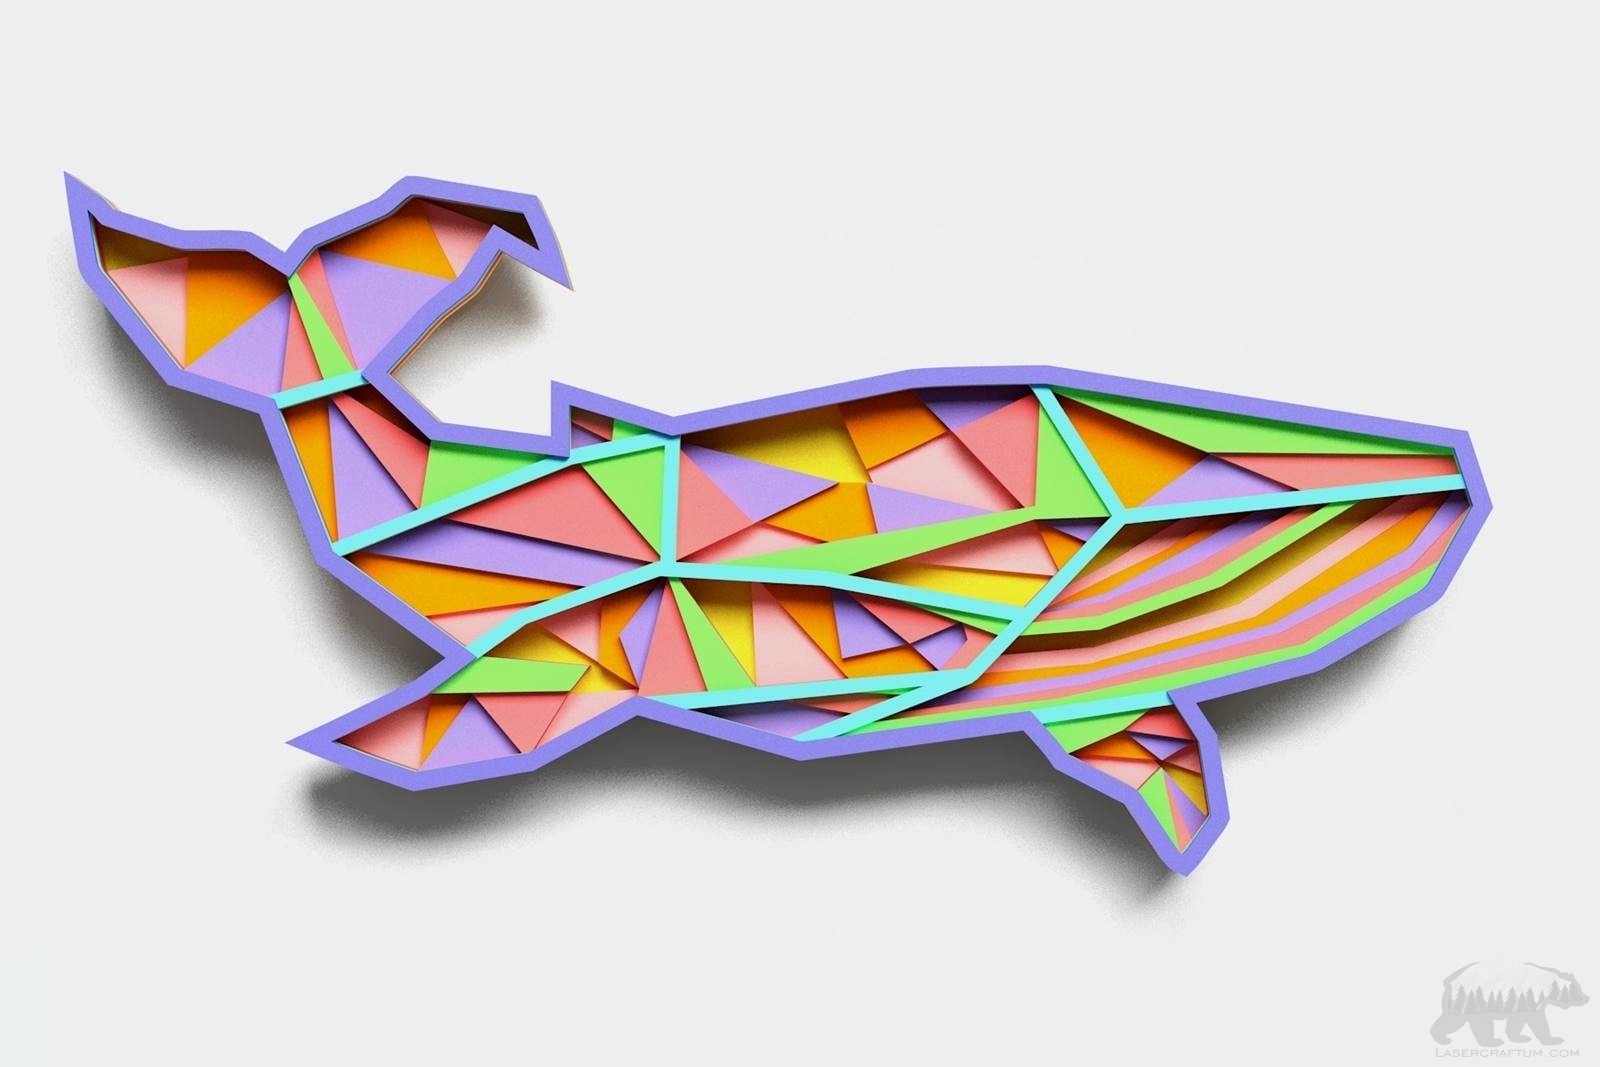 Whale Layered Geometric Design for cutting